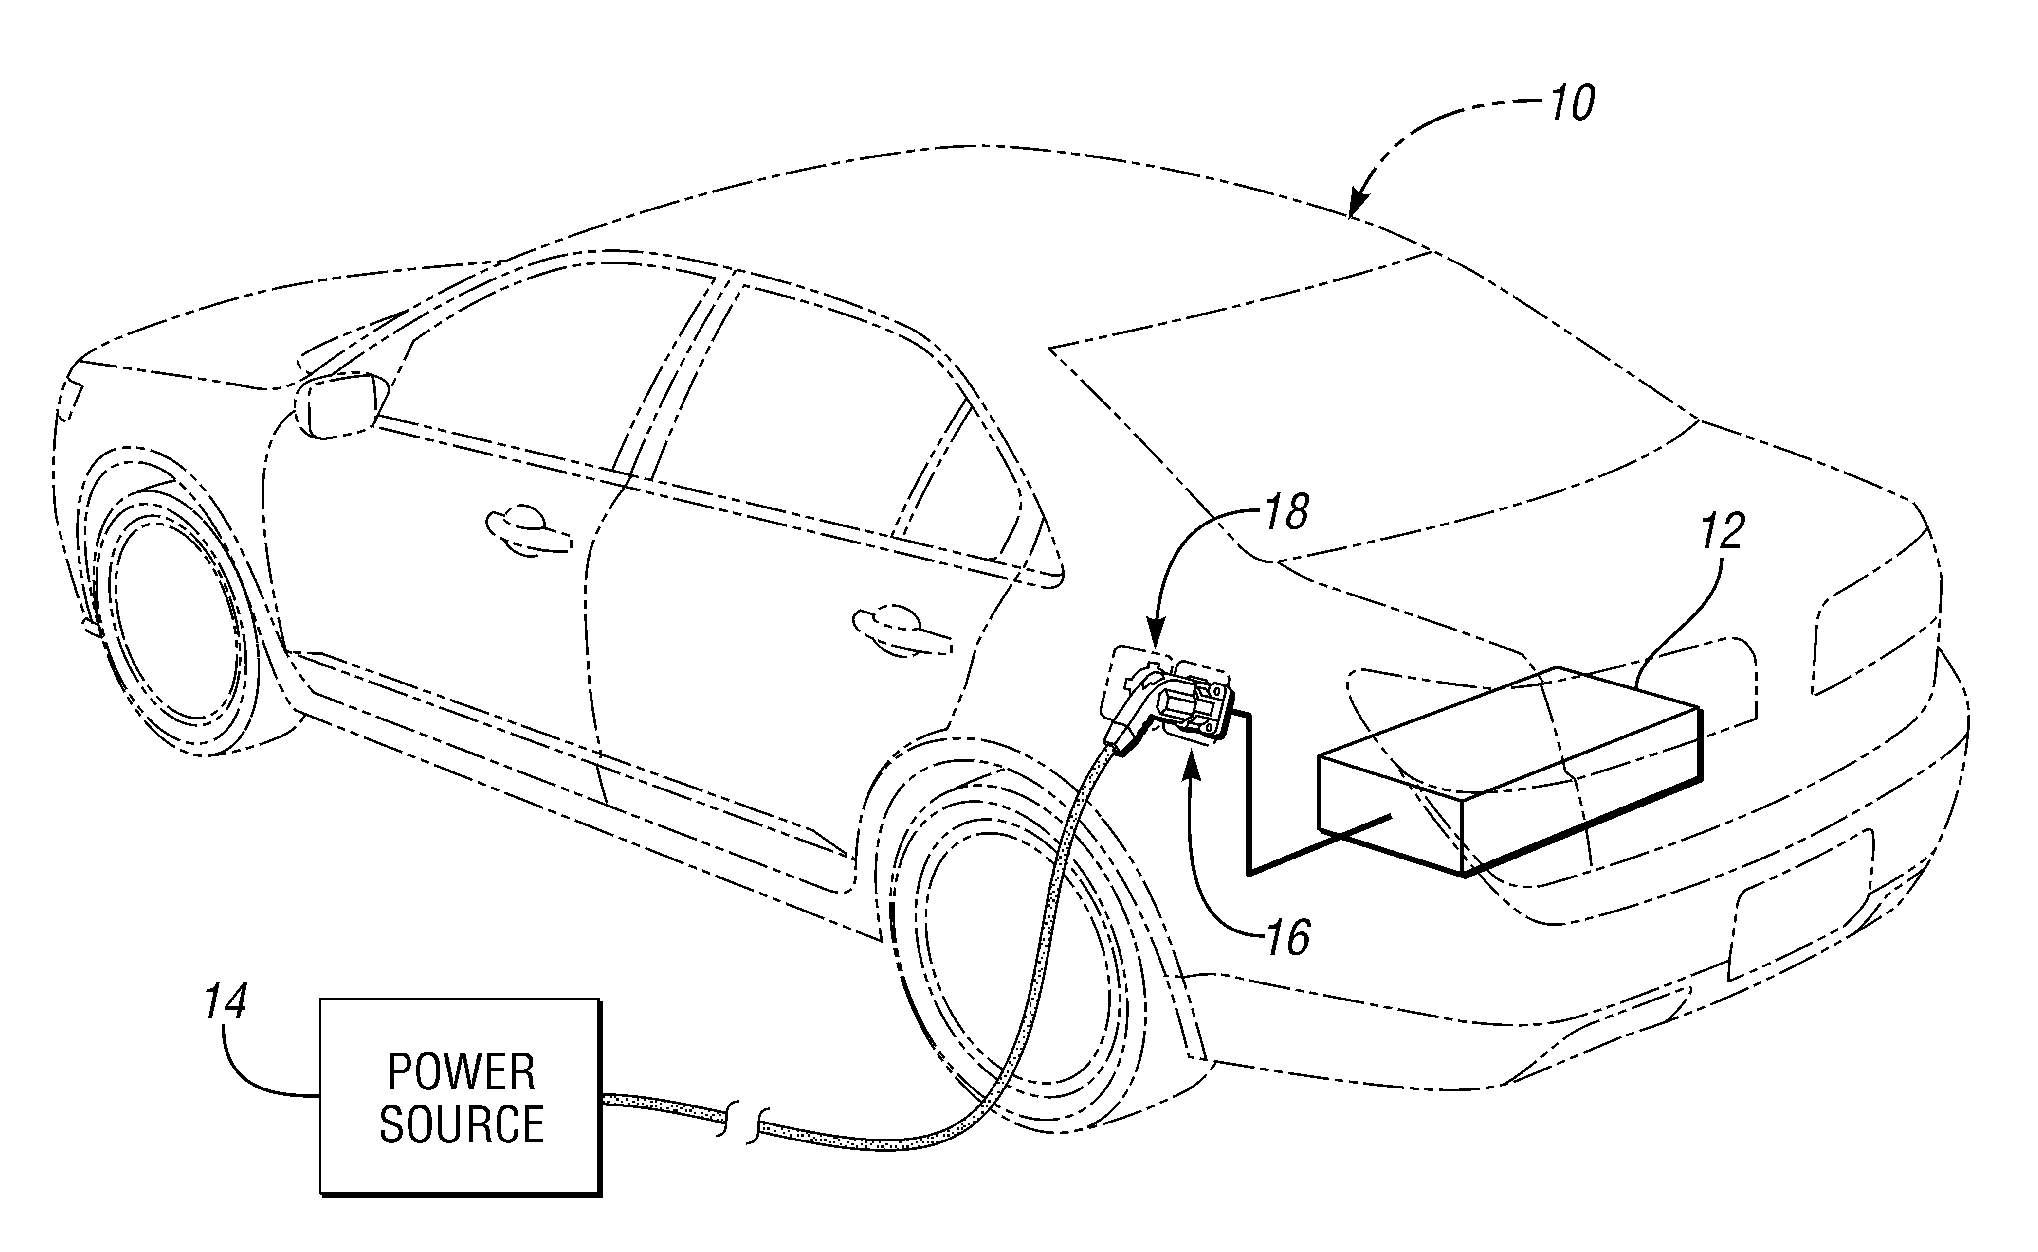 Method And System For Charging An Auxilary Battery In A Plug-In Electric Vehicle